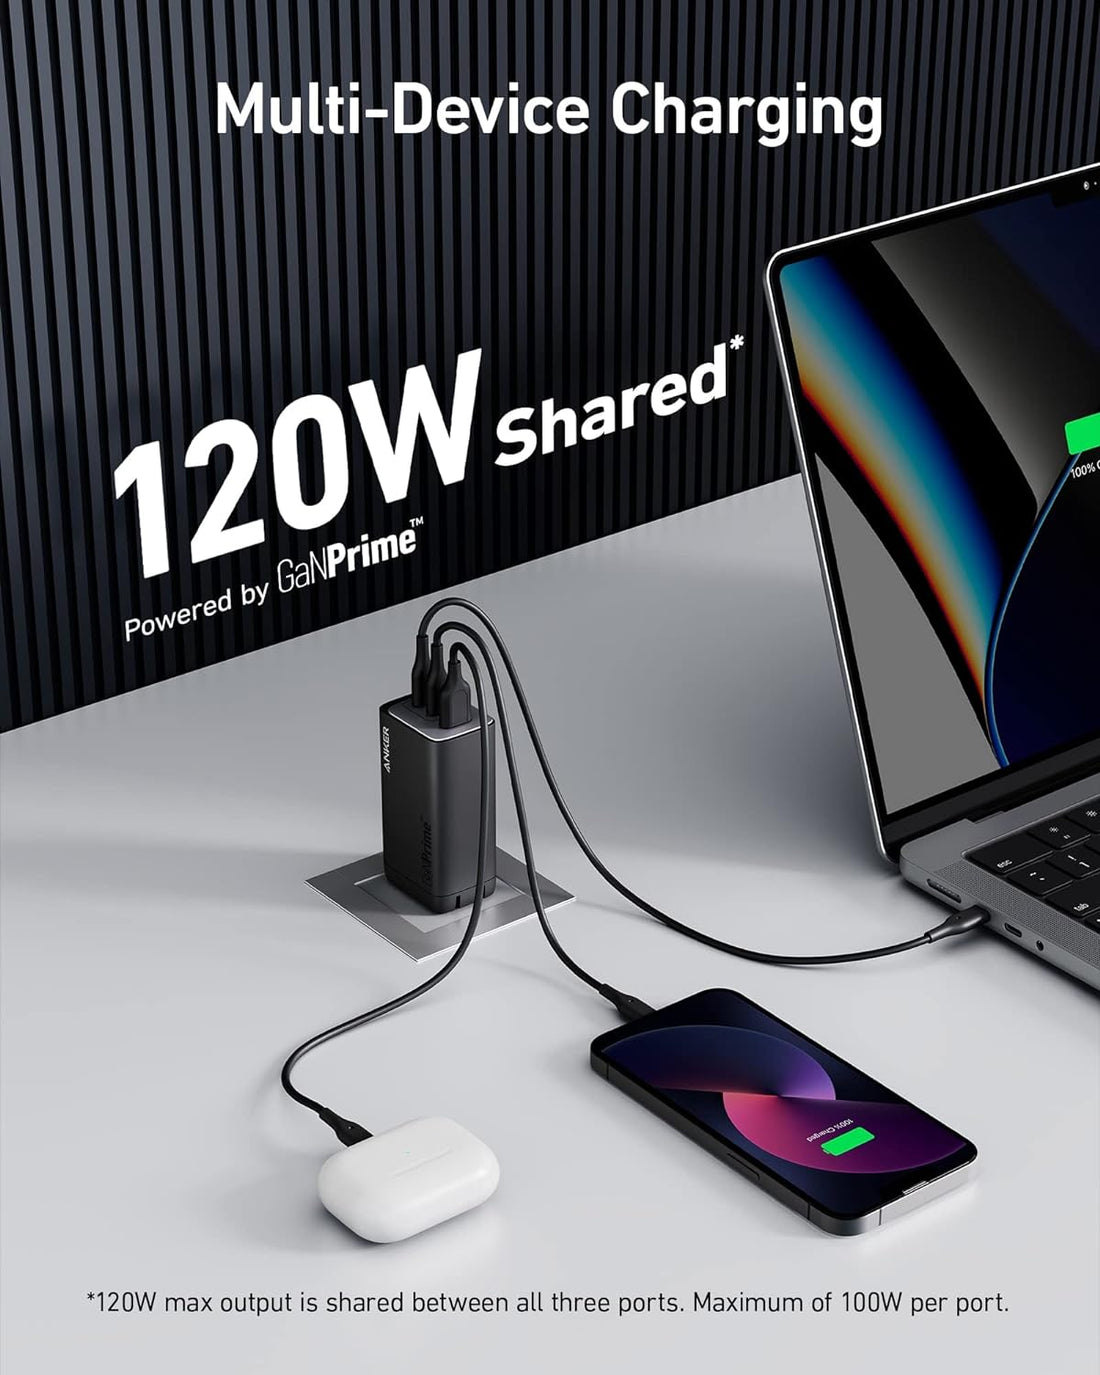 Anker Usb C Charger,737 Charger Ganprime 120W, Pps 3-Port Fast Compact Foldable Wall Charger For Macbook Pro/Air, Ipad Pro, Galaxy S22/S21, Dell Xps 13, Note 20/10+, Iphone 13/Pro, And More, Black